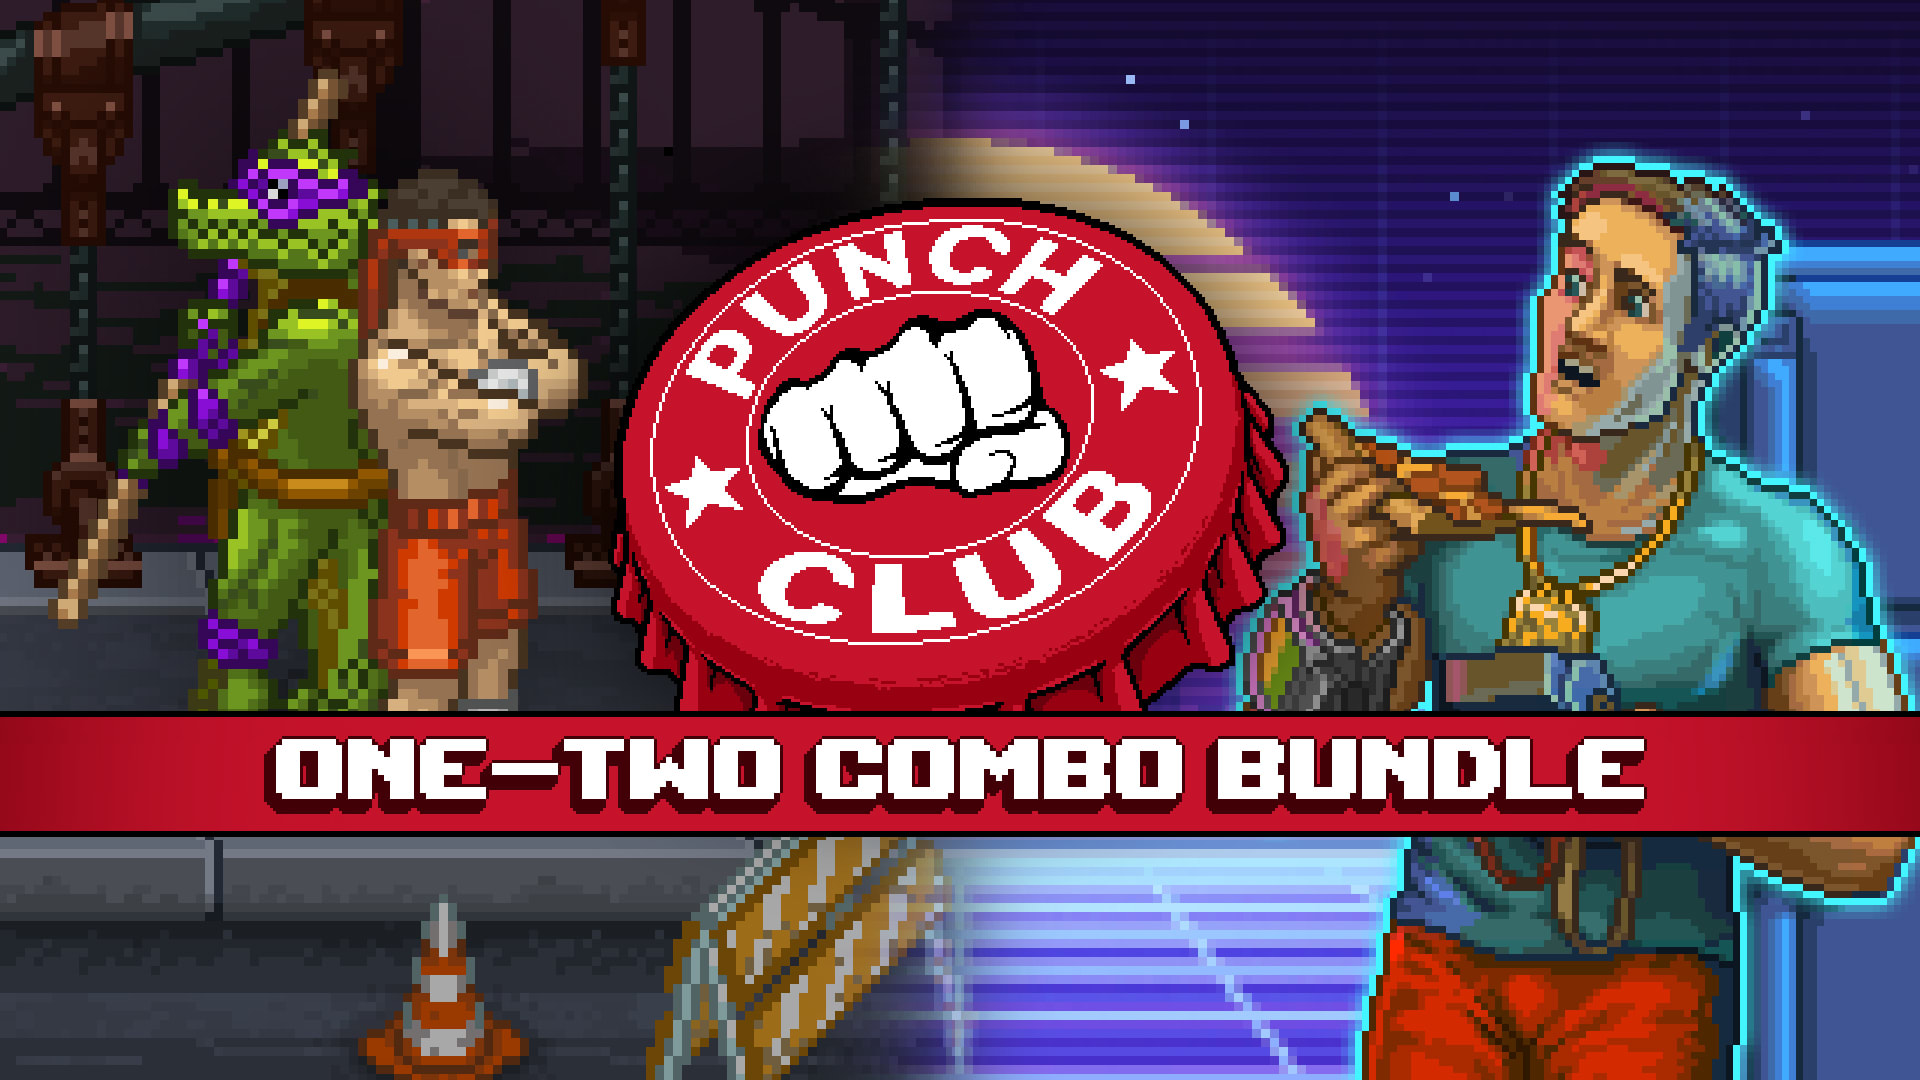 One-Two Combo Bundle: franchise Punch Club 1